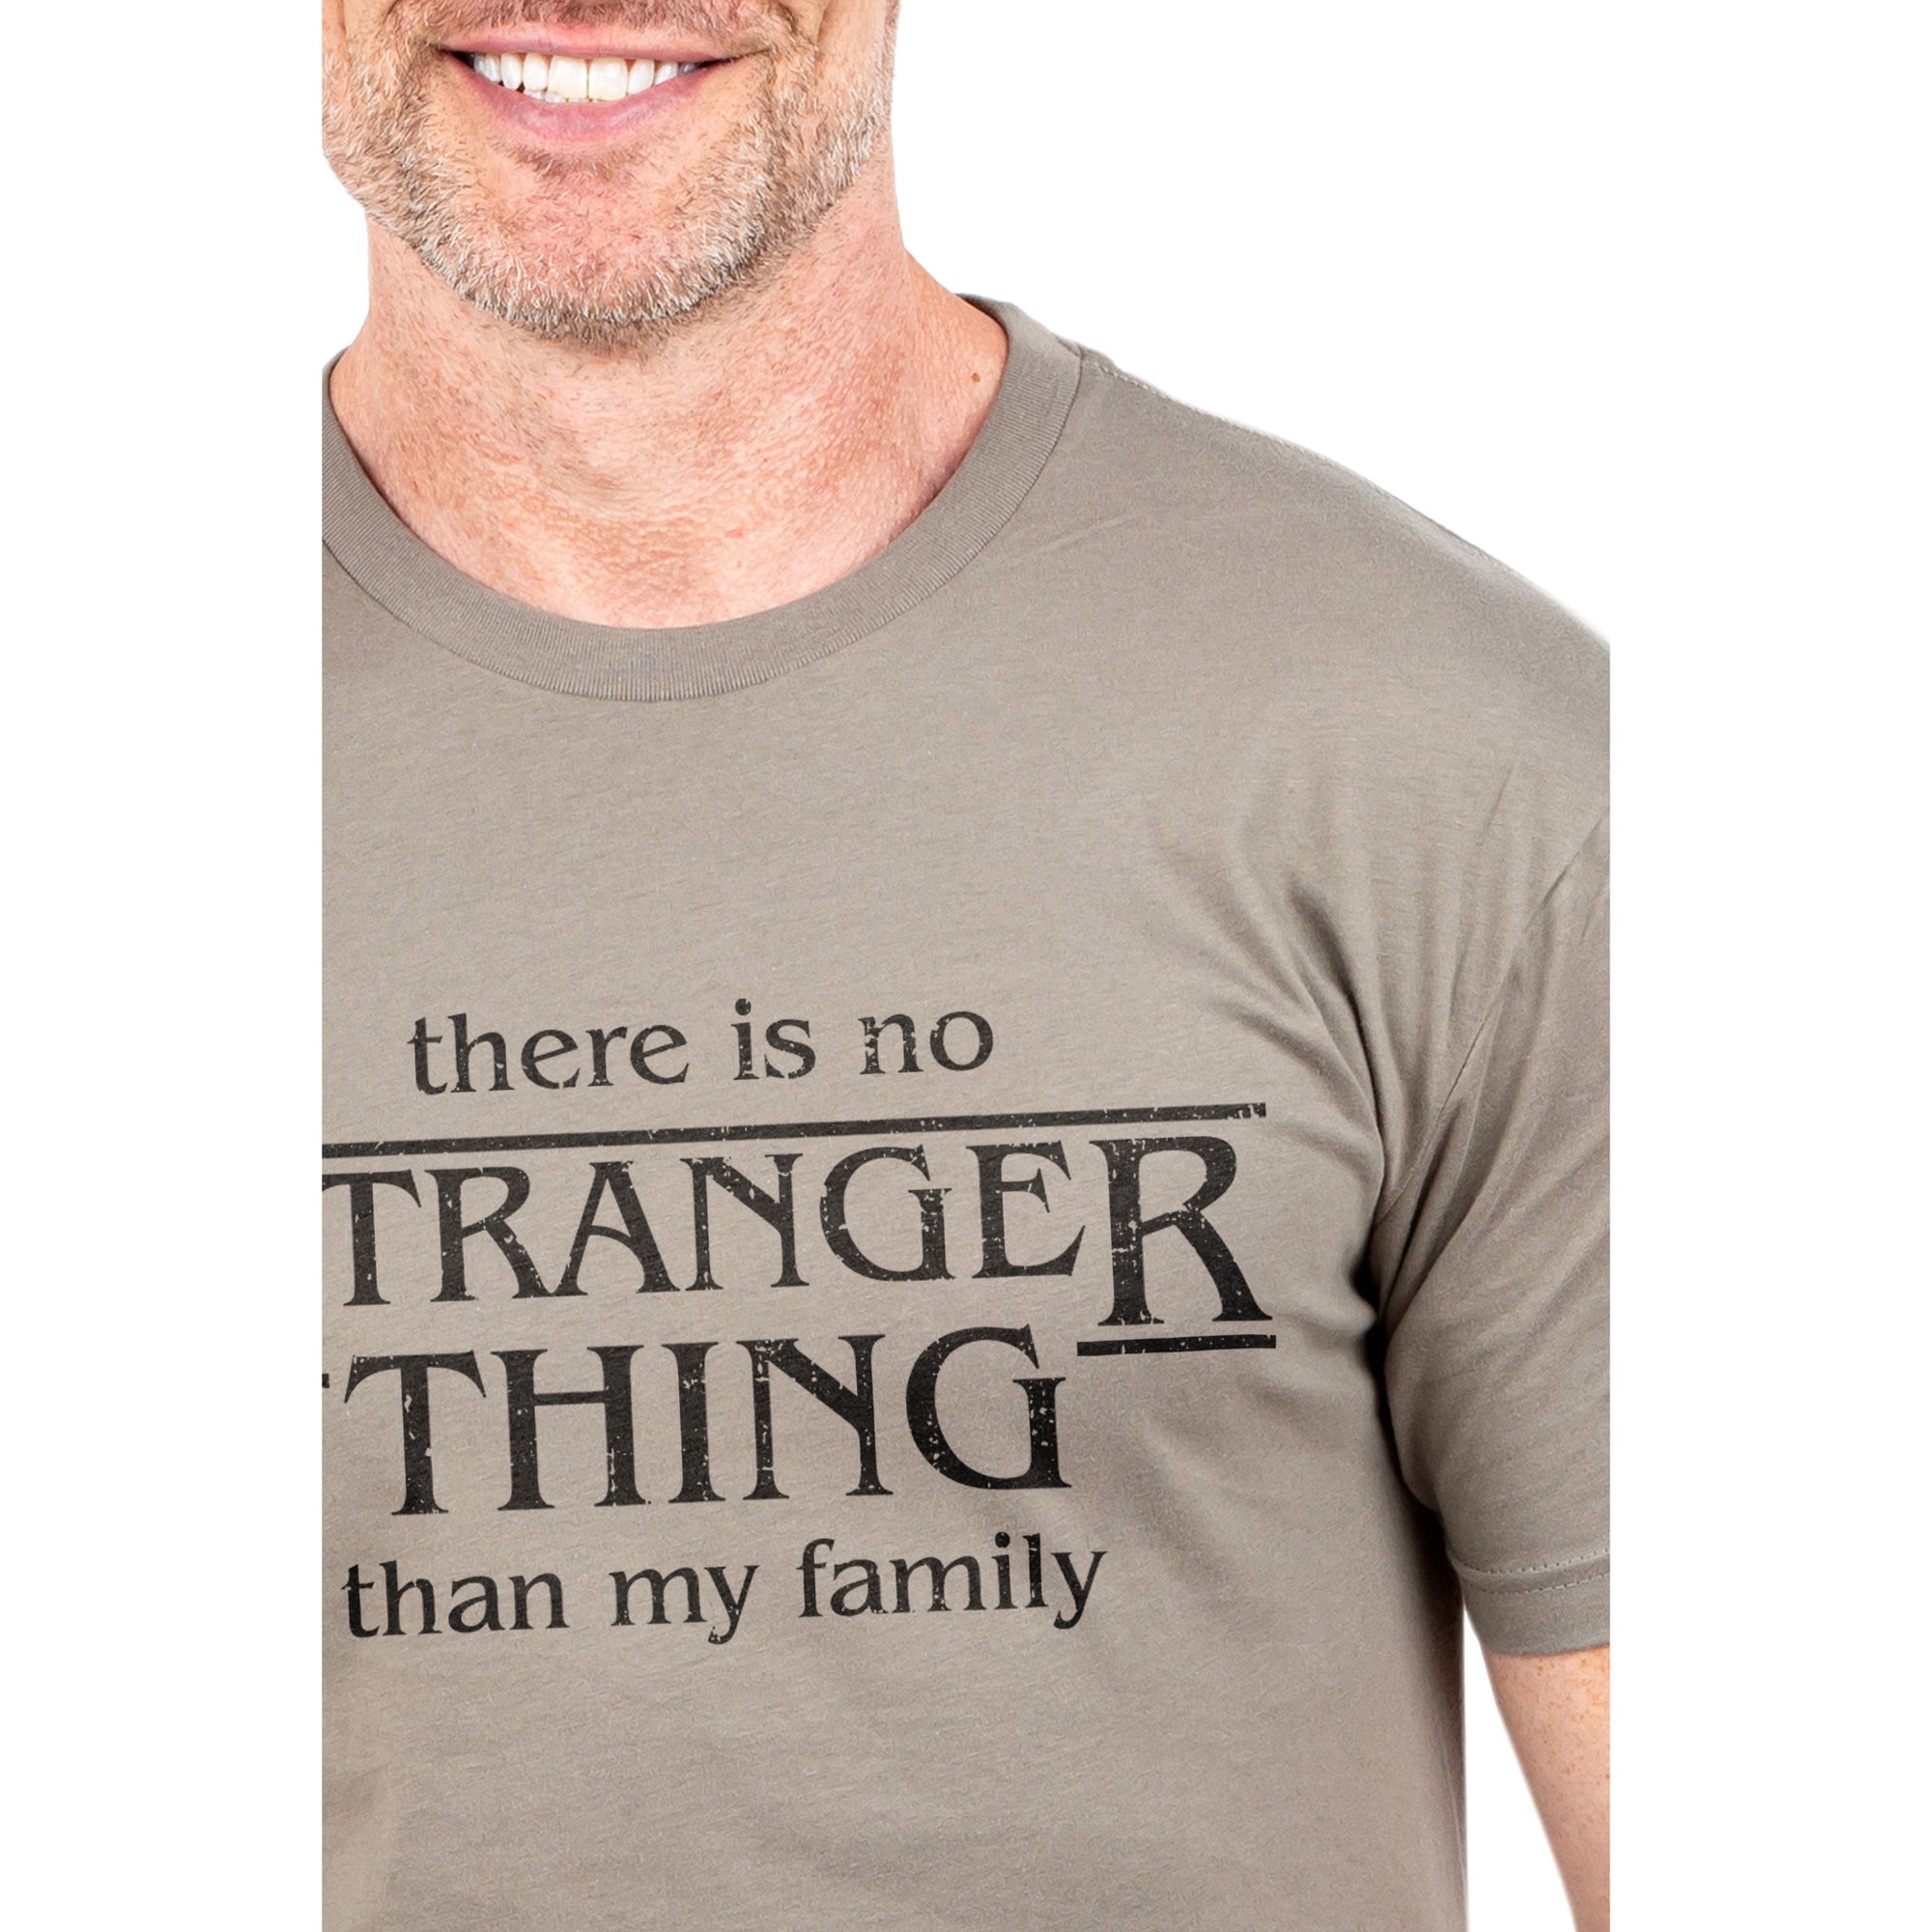 There Is No Stranger Thing Than My Family Printed Graphic Men's Crew T-Shirt Heather Tan Closeup Image